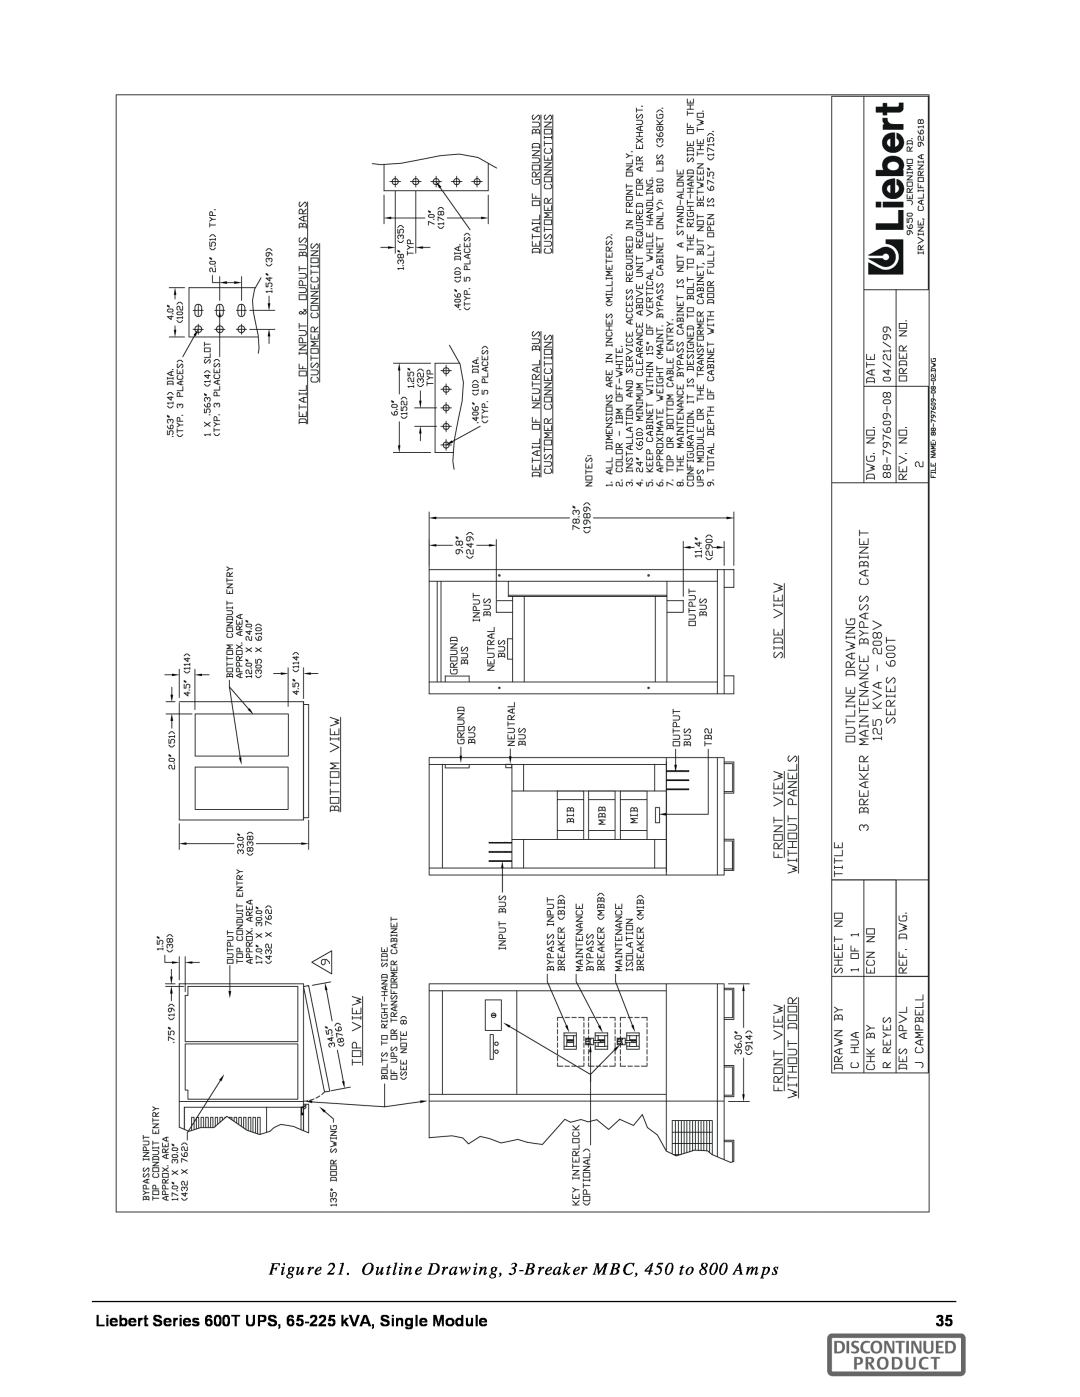 Emerson SERIES 600T manual Outline Drawing, 3-Breaker MBC, 450 to 800 Amps, Discontinued Product 